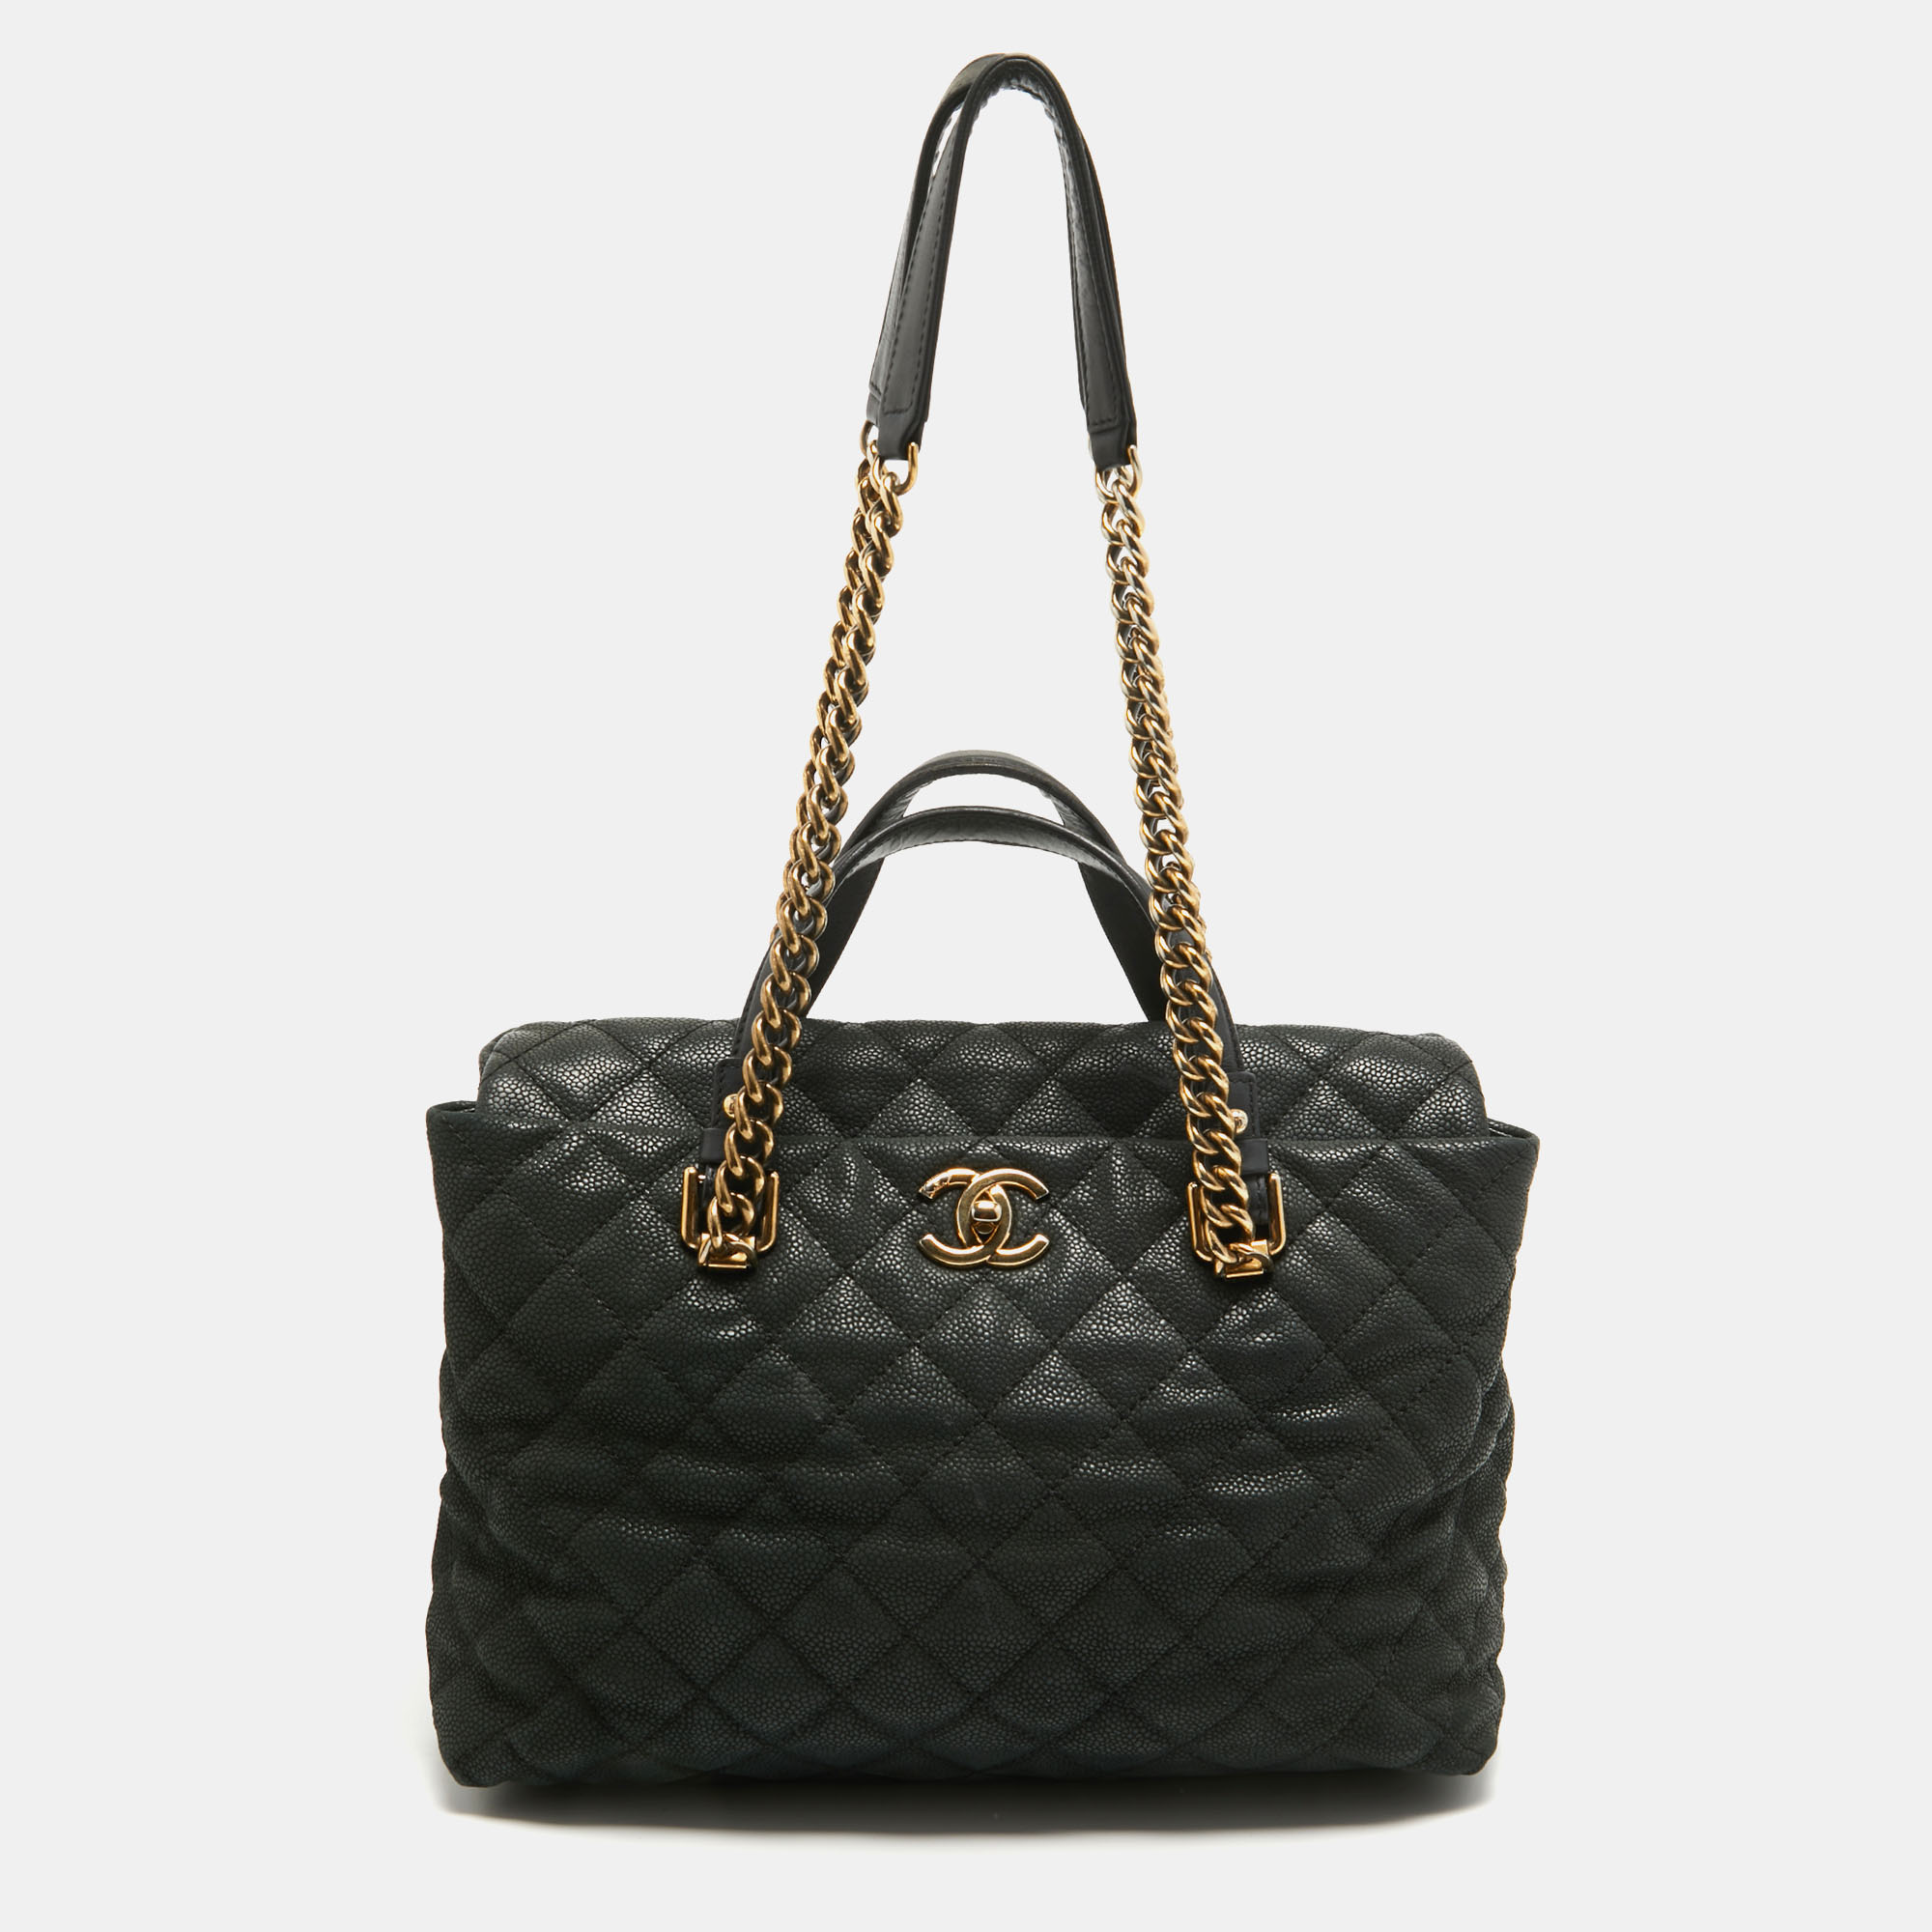 Pre-owned Chanel Black Caviar Leather Chic Quilt Tote